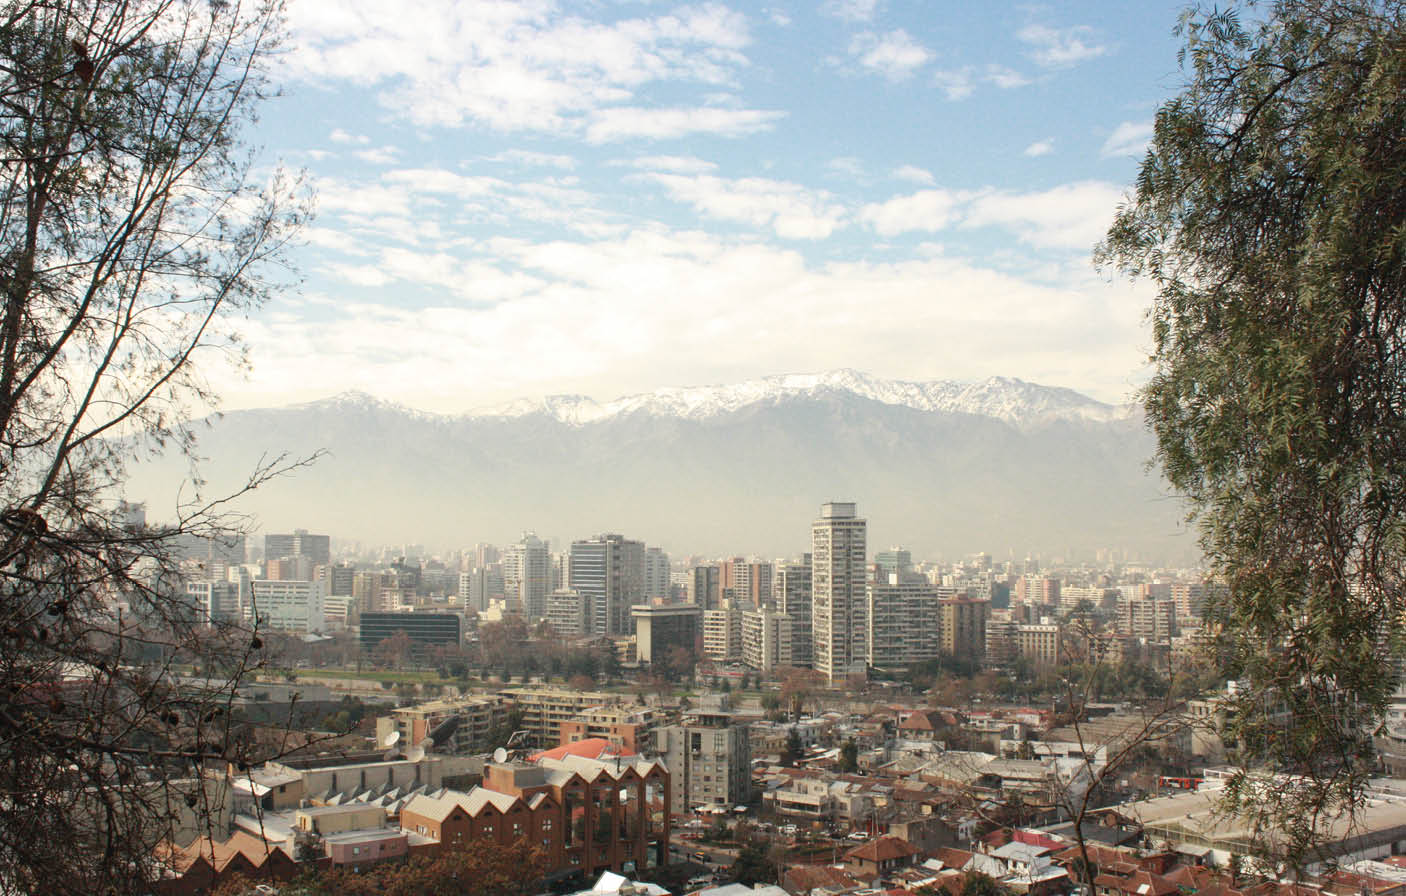 Andes Mountains in Santiago, Chile